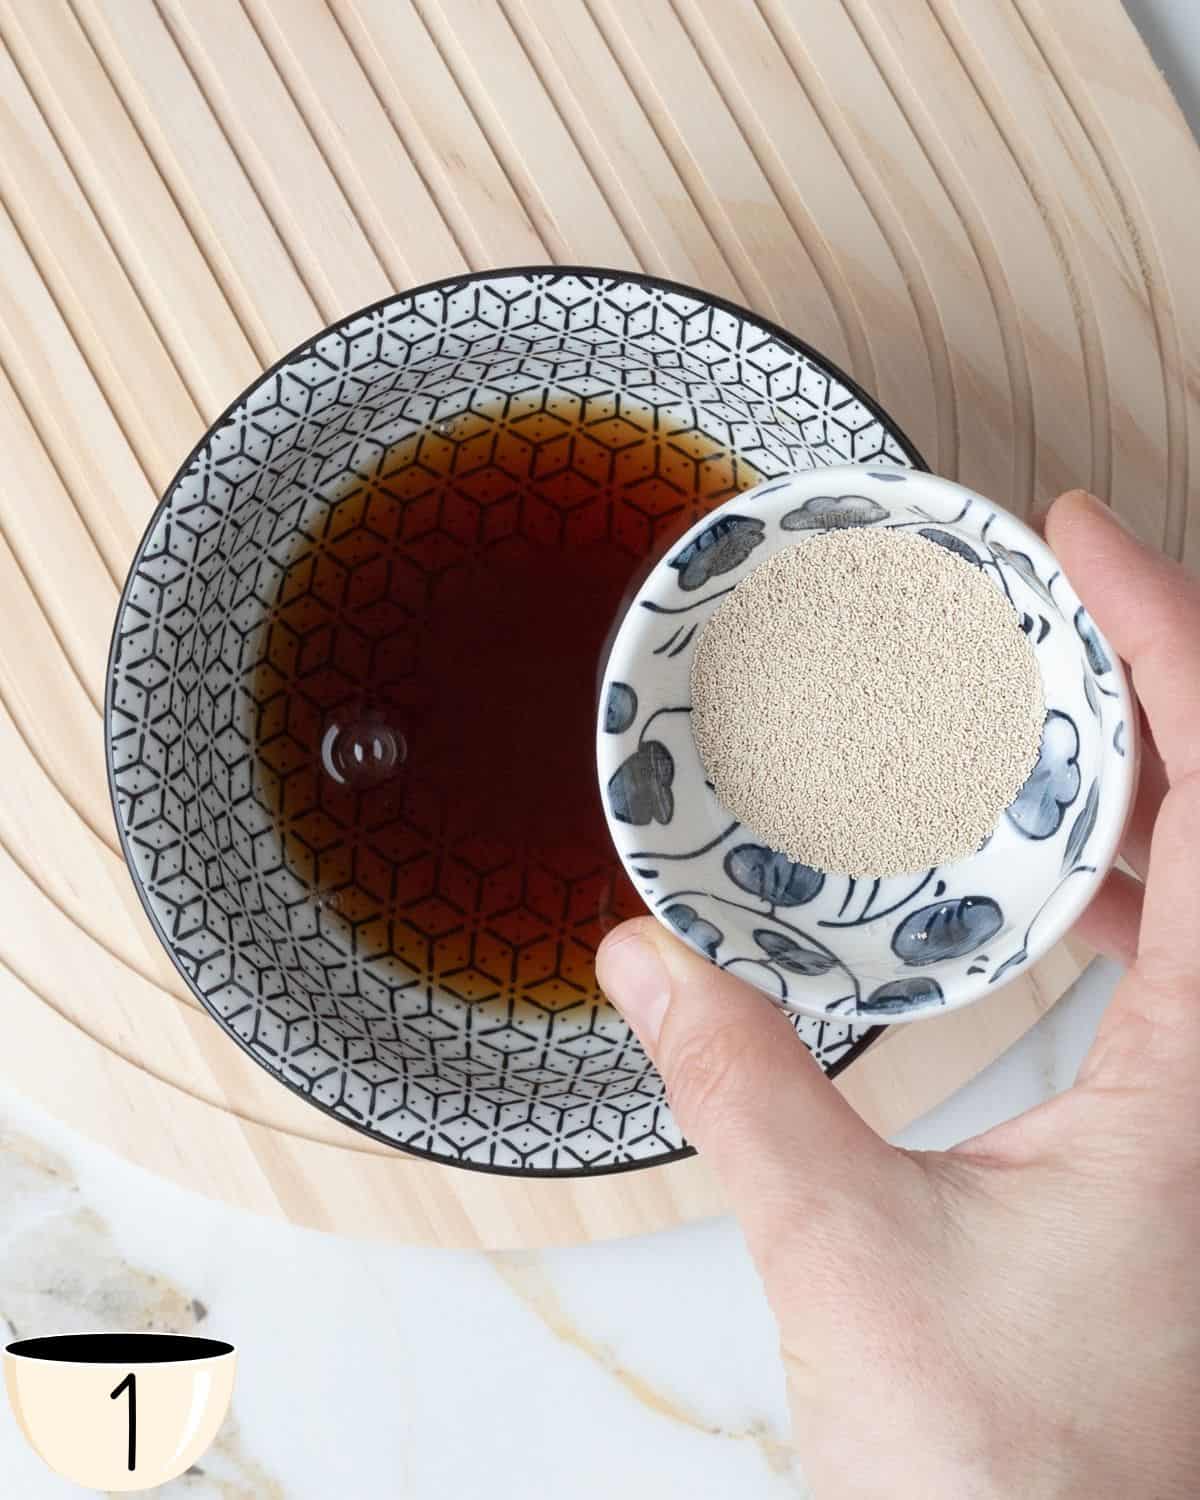 A person's hand holding a small bowl with Quick Rise Yeast over a larger bowl containing water abd brown sugar to activate the yeast.